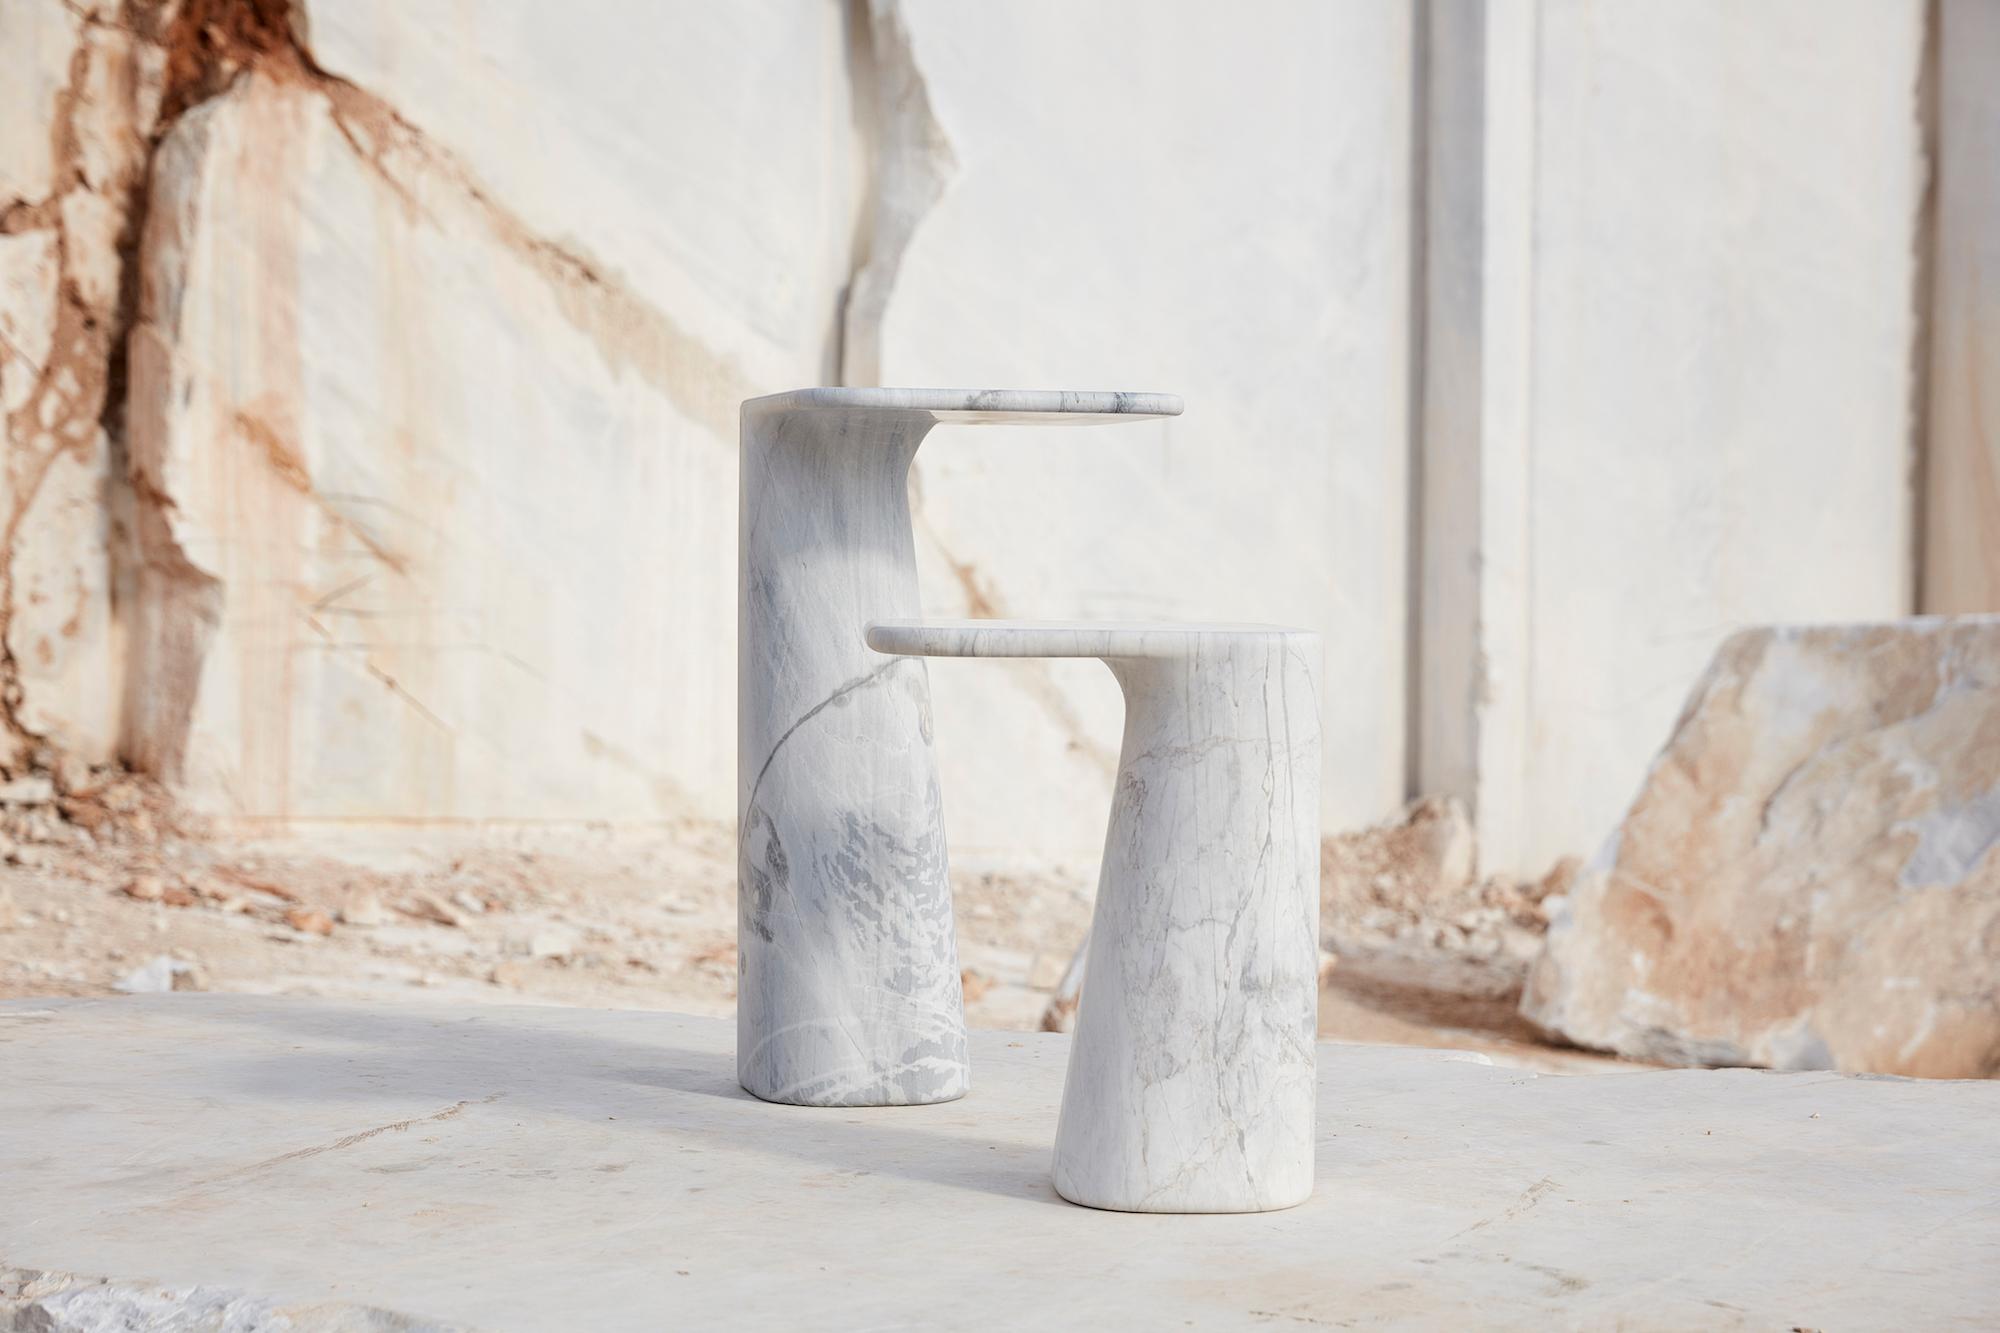 A solid piece of Elba is carved to create a cantilevered resting surface for objects. This is stone at its purest: simple, distinctive and statuesque. Cut to heights of 500mm or 720mm, each side table is available individually or as a complementary